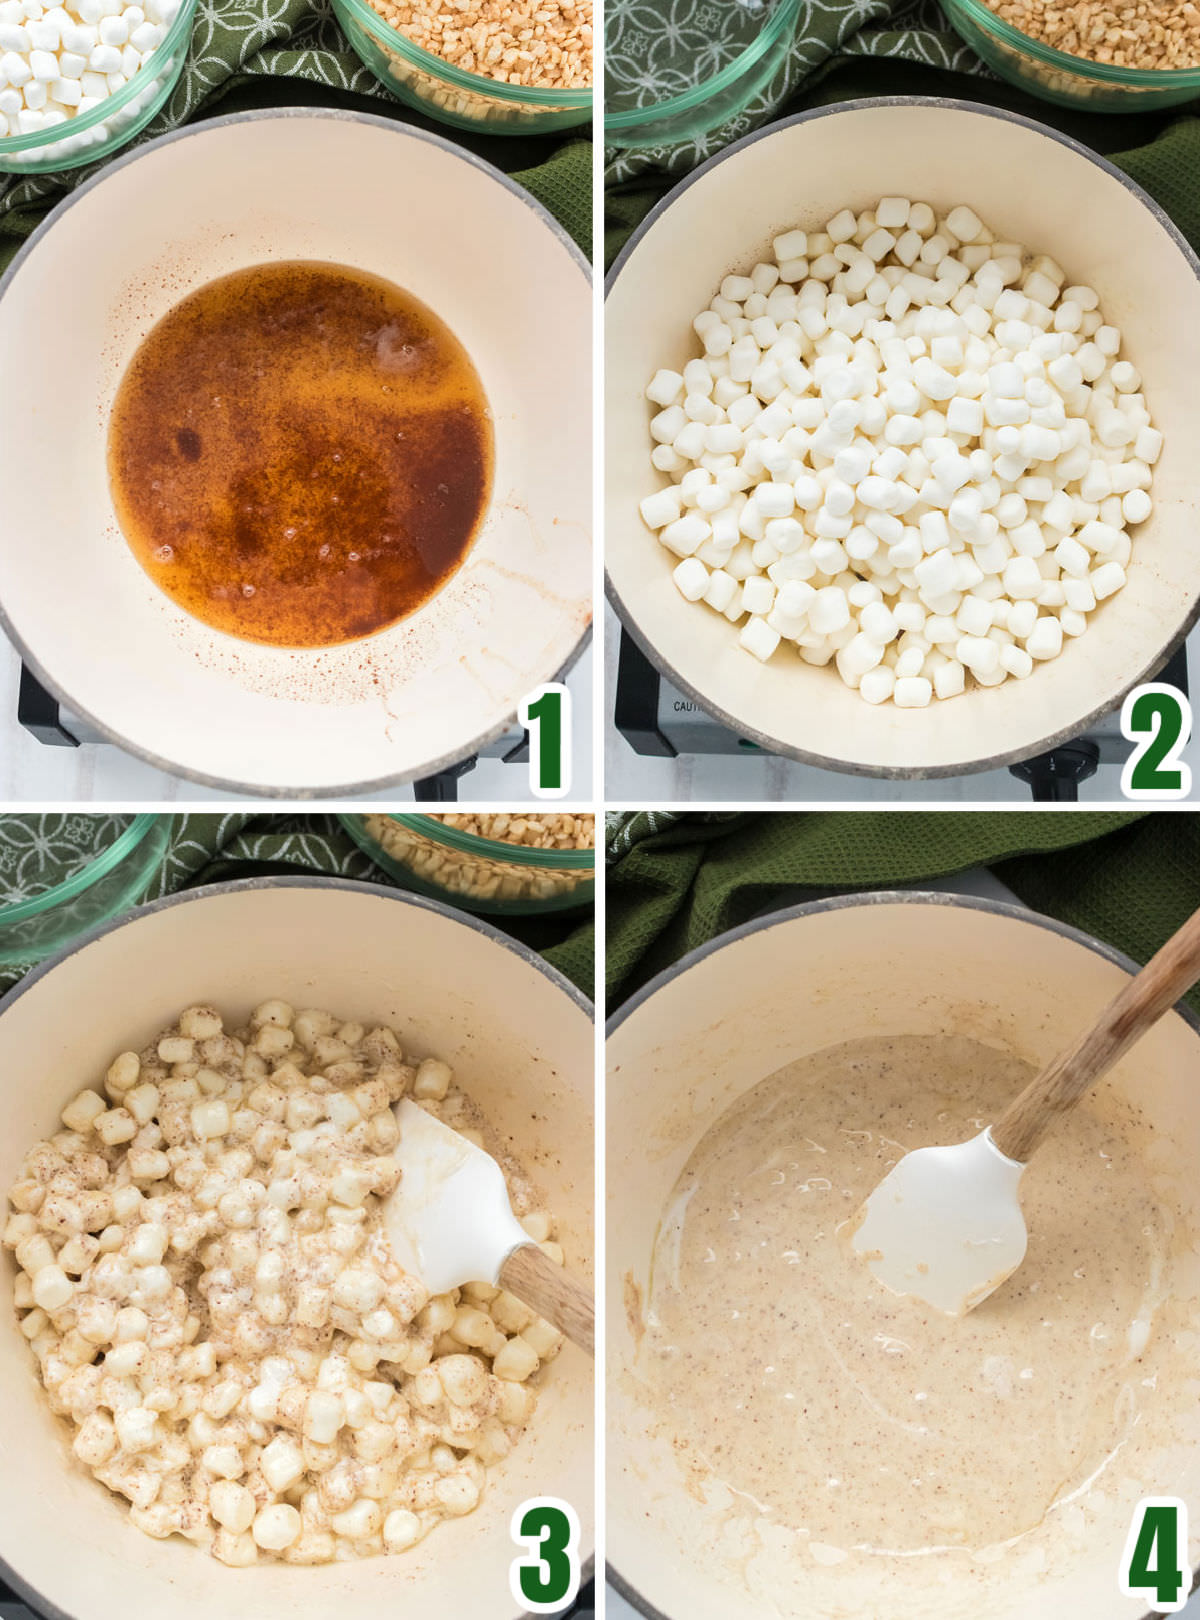 Collage image showing the steps for making the Brown Butter Marshmallow mixture.